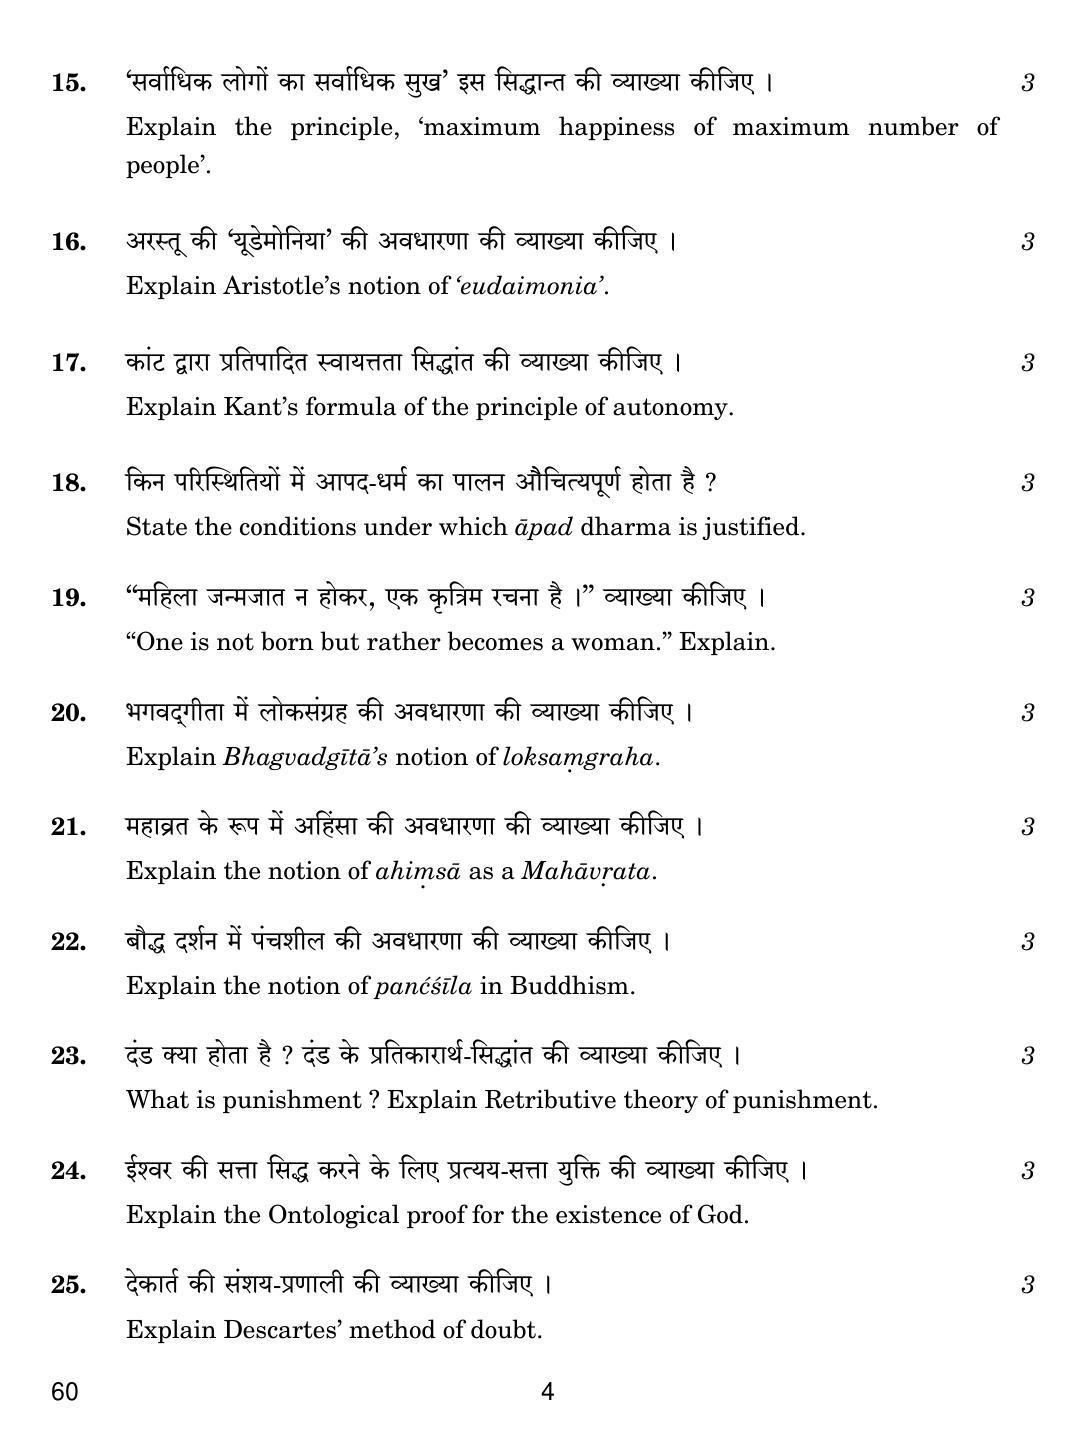 CBSE Class 12 60 PHILOSOPHY 2019 Compartment Question Paper - Page 4